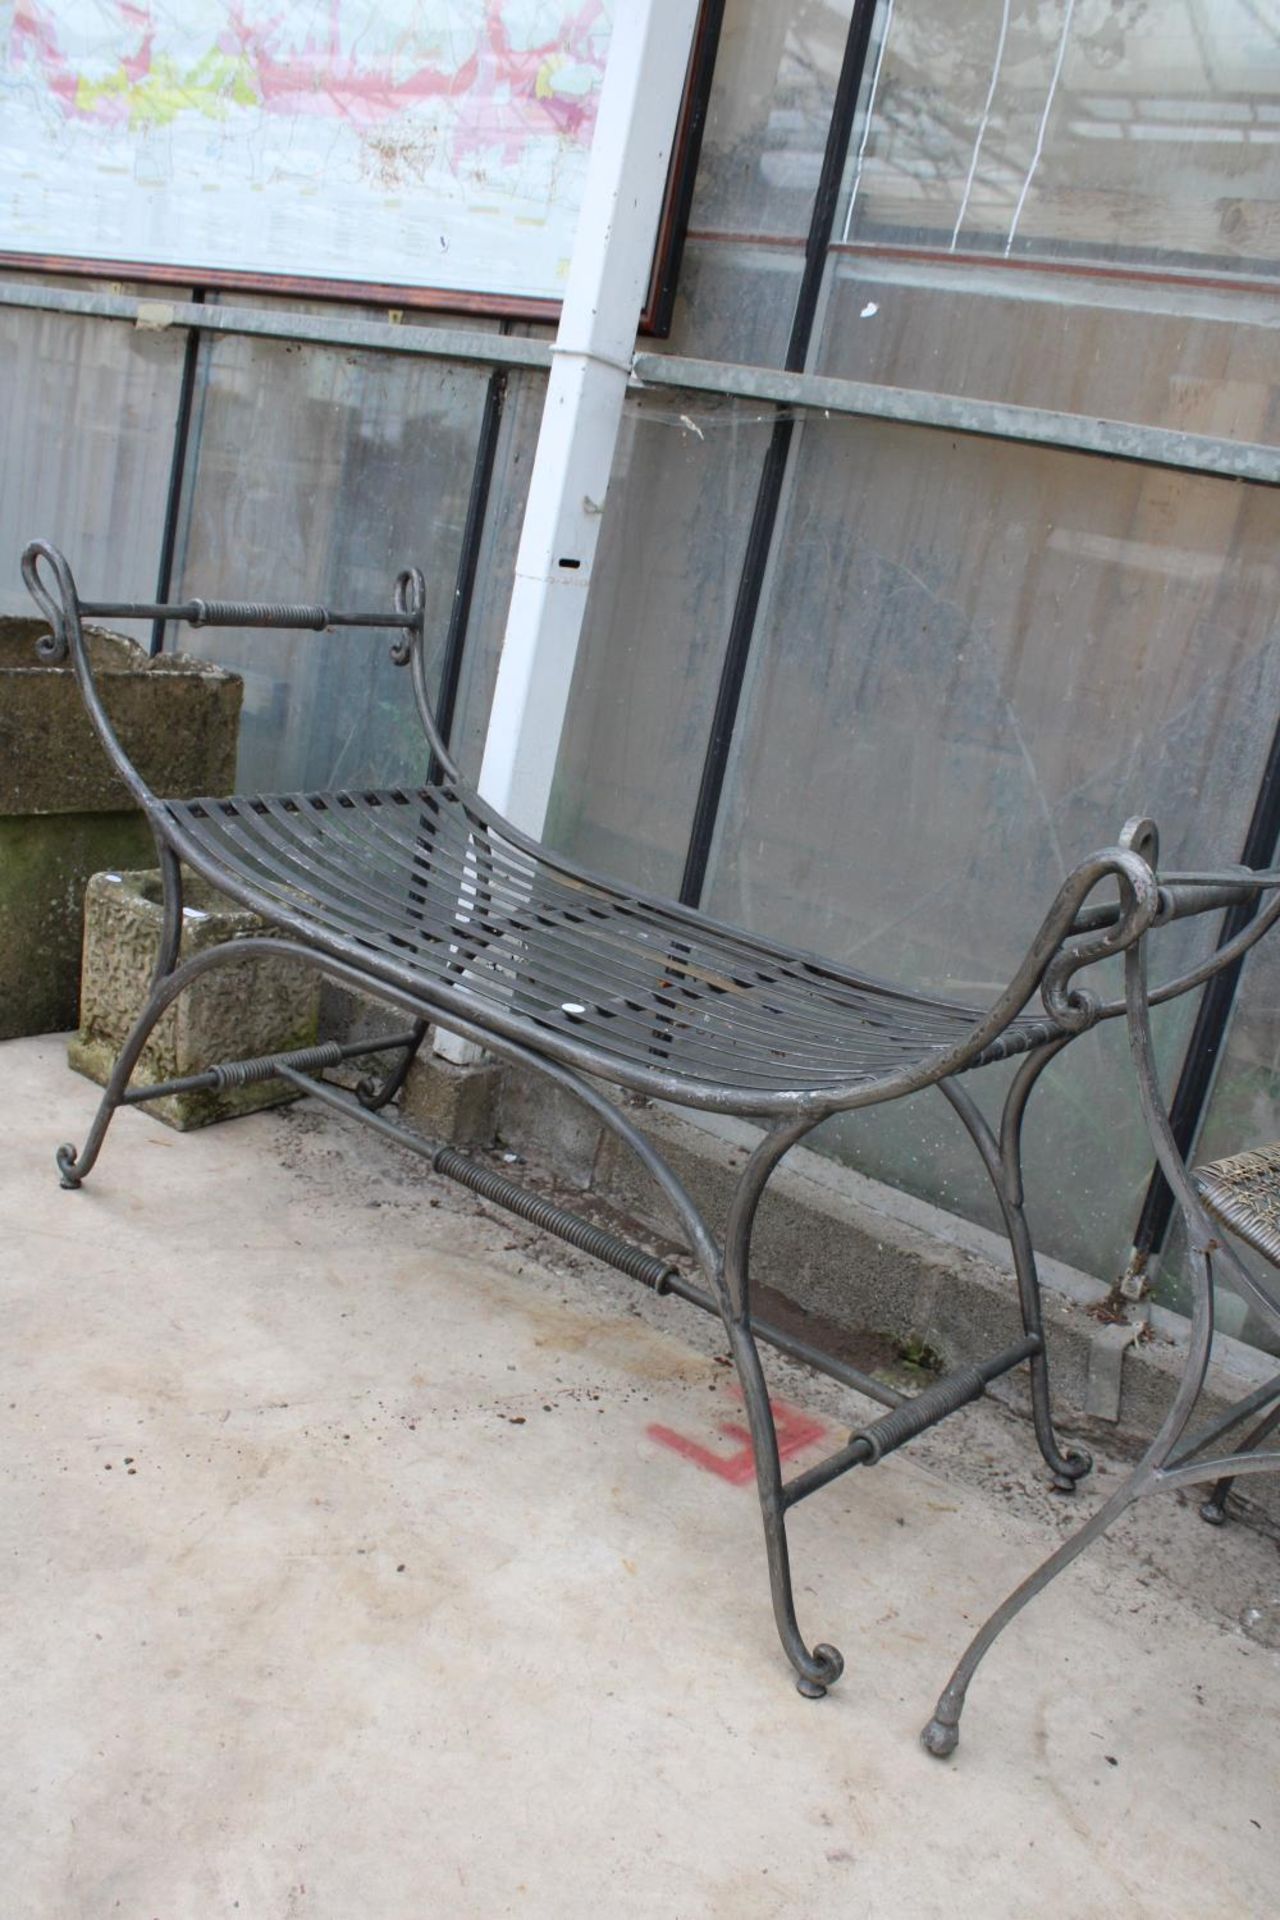 A METAL GARDEN CHAIR WITH RATTAN SEAT AND BACK AND A SIMILAR HEAVY METAL BENCH - Image 3 of 3